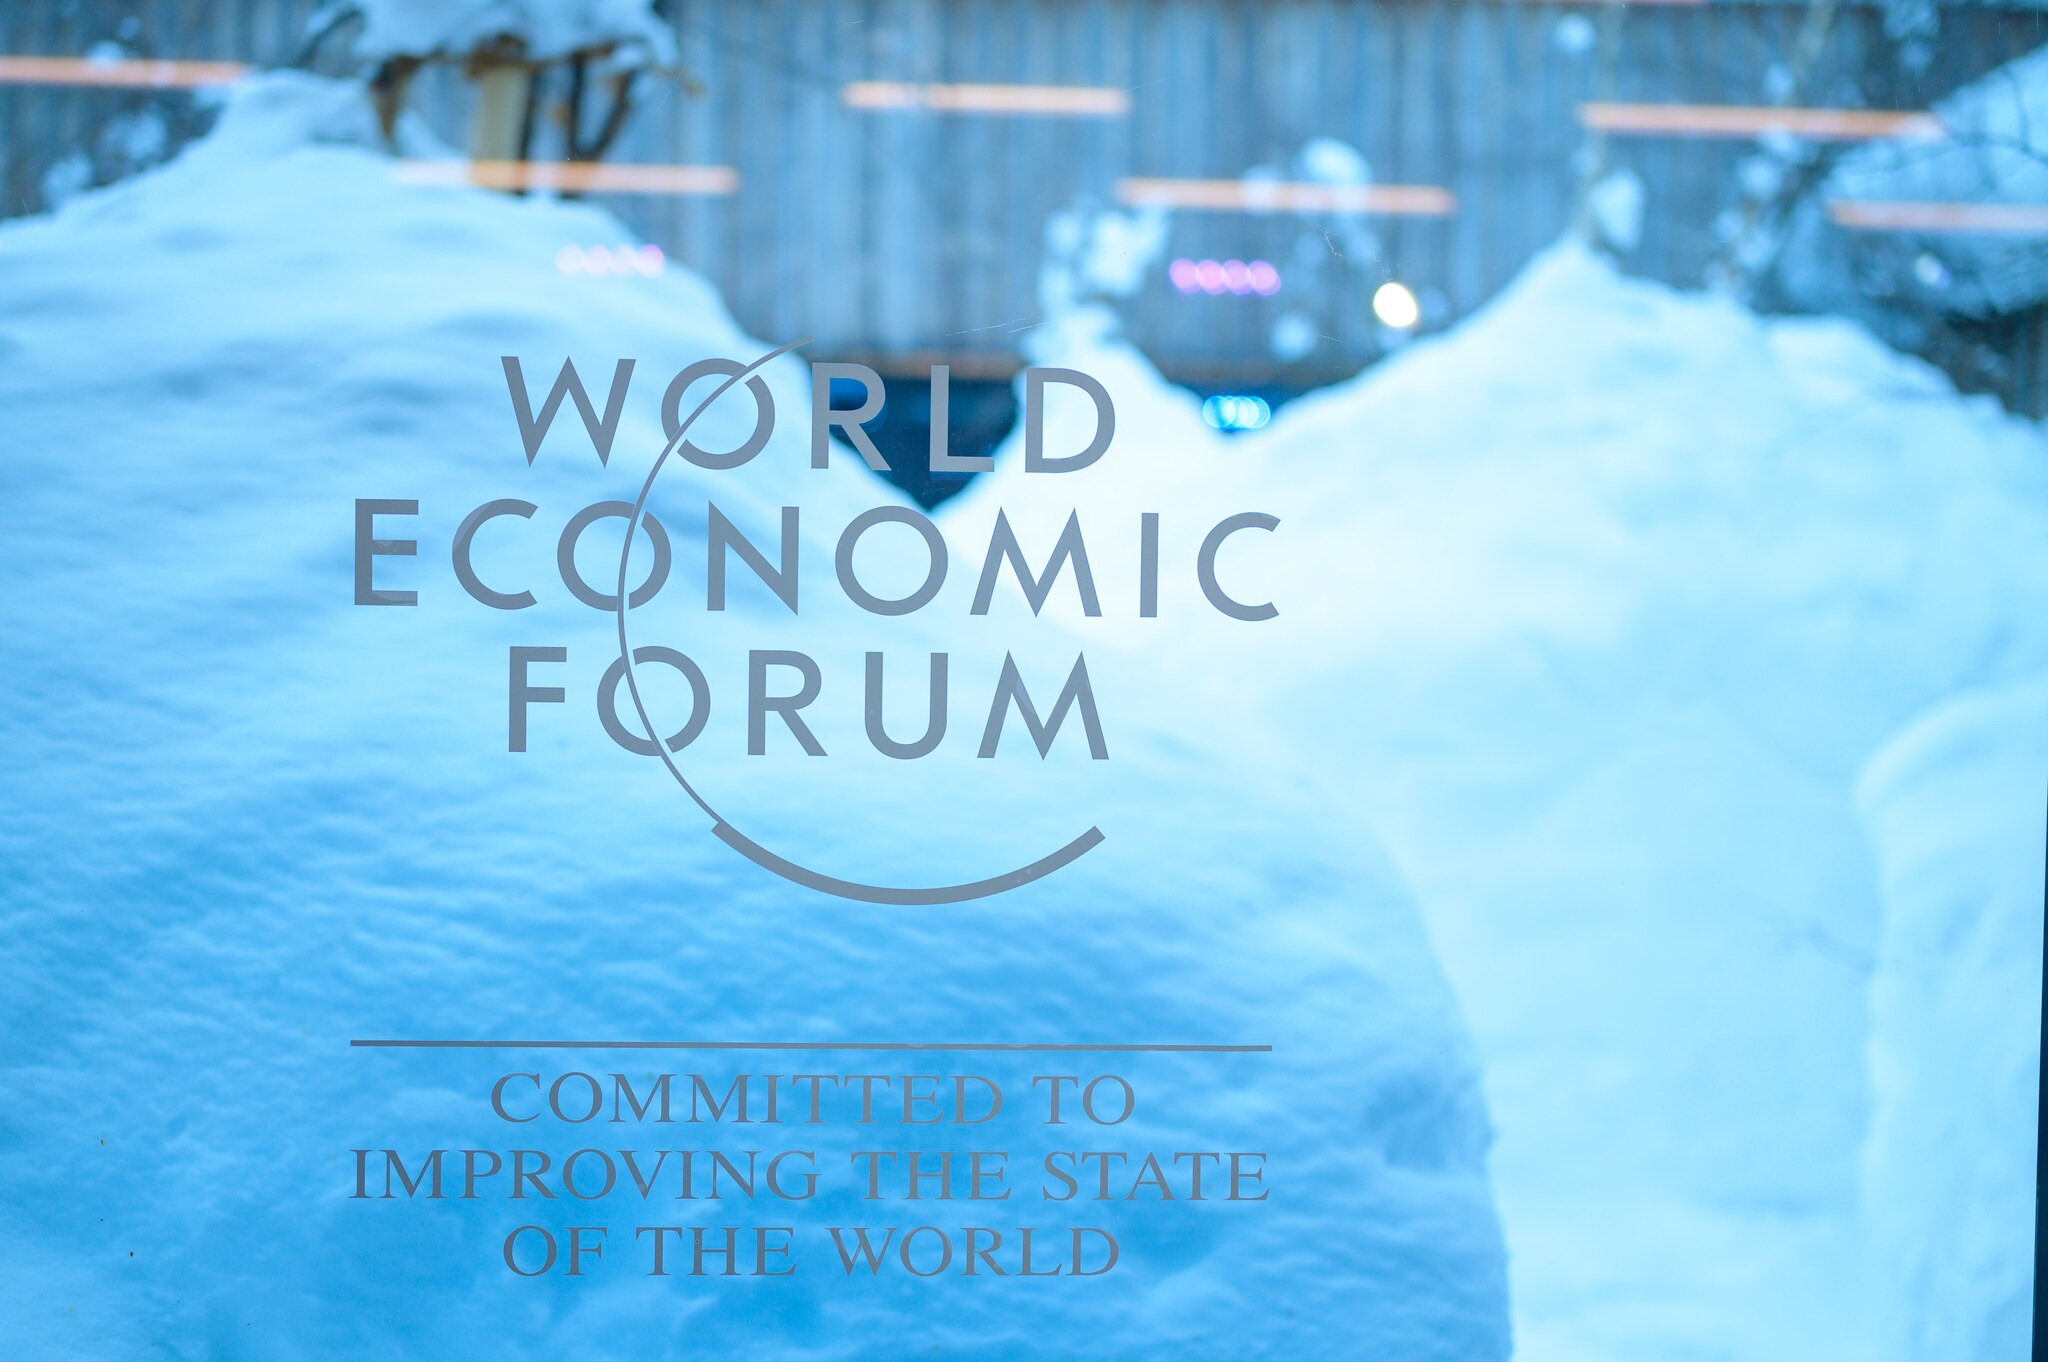 India key pillar in collaborative global efforts to fight COVID-19: WEF chief